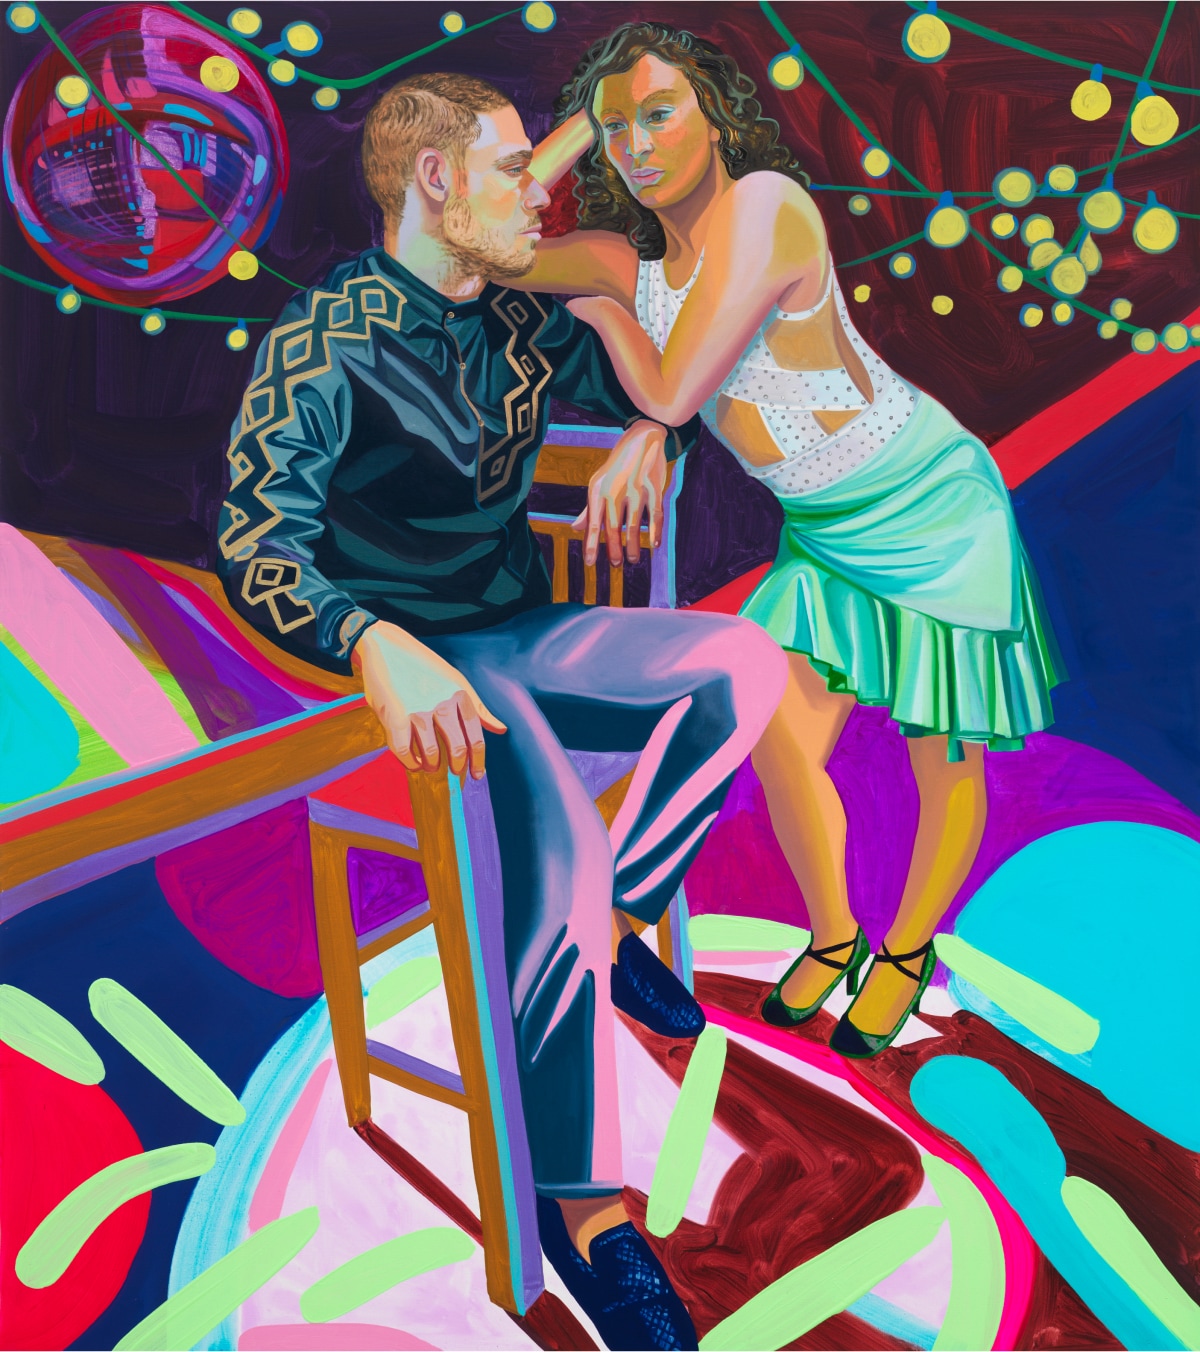 Artwork featuring a man and woman, facing one another, in a colorful dance club